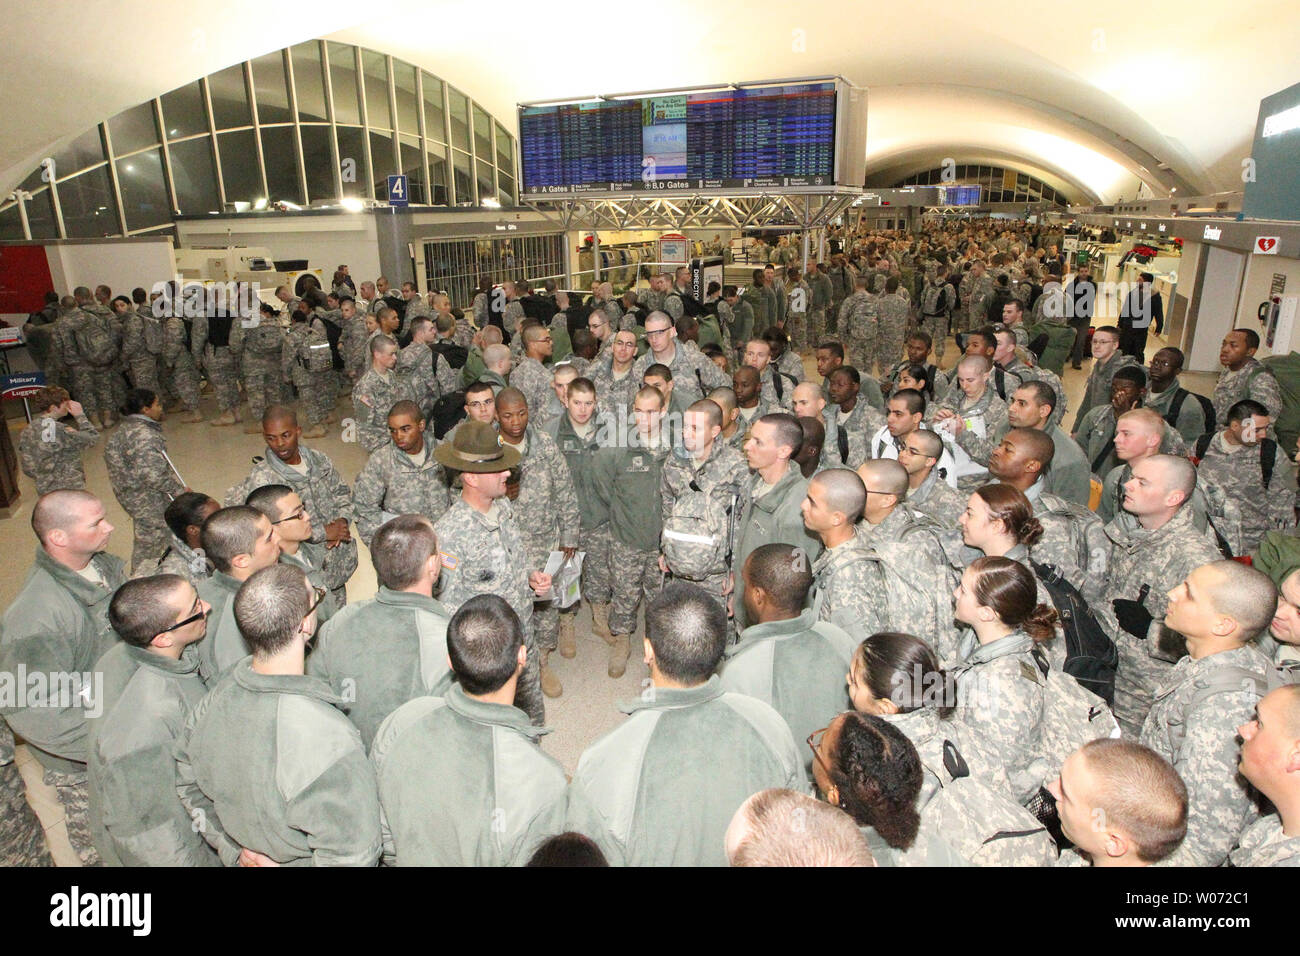 Troops from Fort Leonard Wood gather at Lambert-St. Louis International Airport as Holiday Block Leave begins in St. Louis on December 21, 2011. Approximately 4,000 troops are participating in Holiday Block Leave, the day when military installations release their personnel for the holidays. The USO of Missouri will host many of them as they find their way home.   UPI/Bill Greenblatt Stock Photo